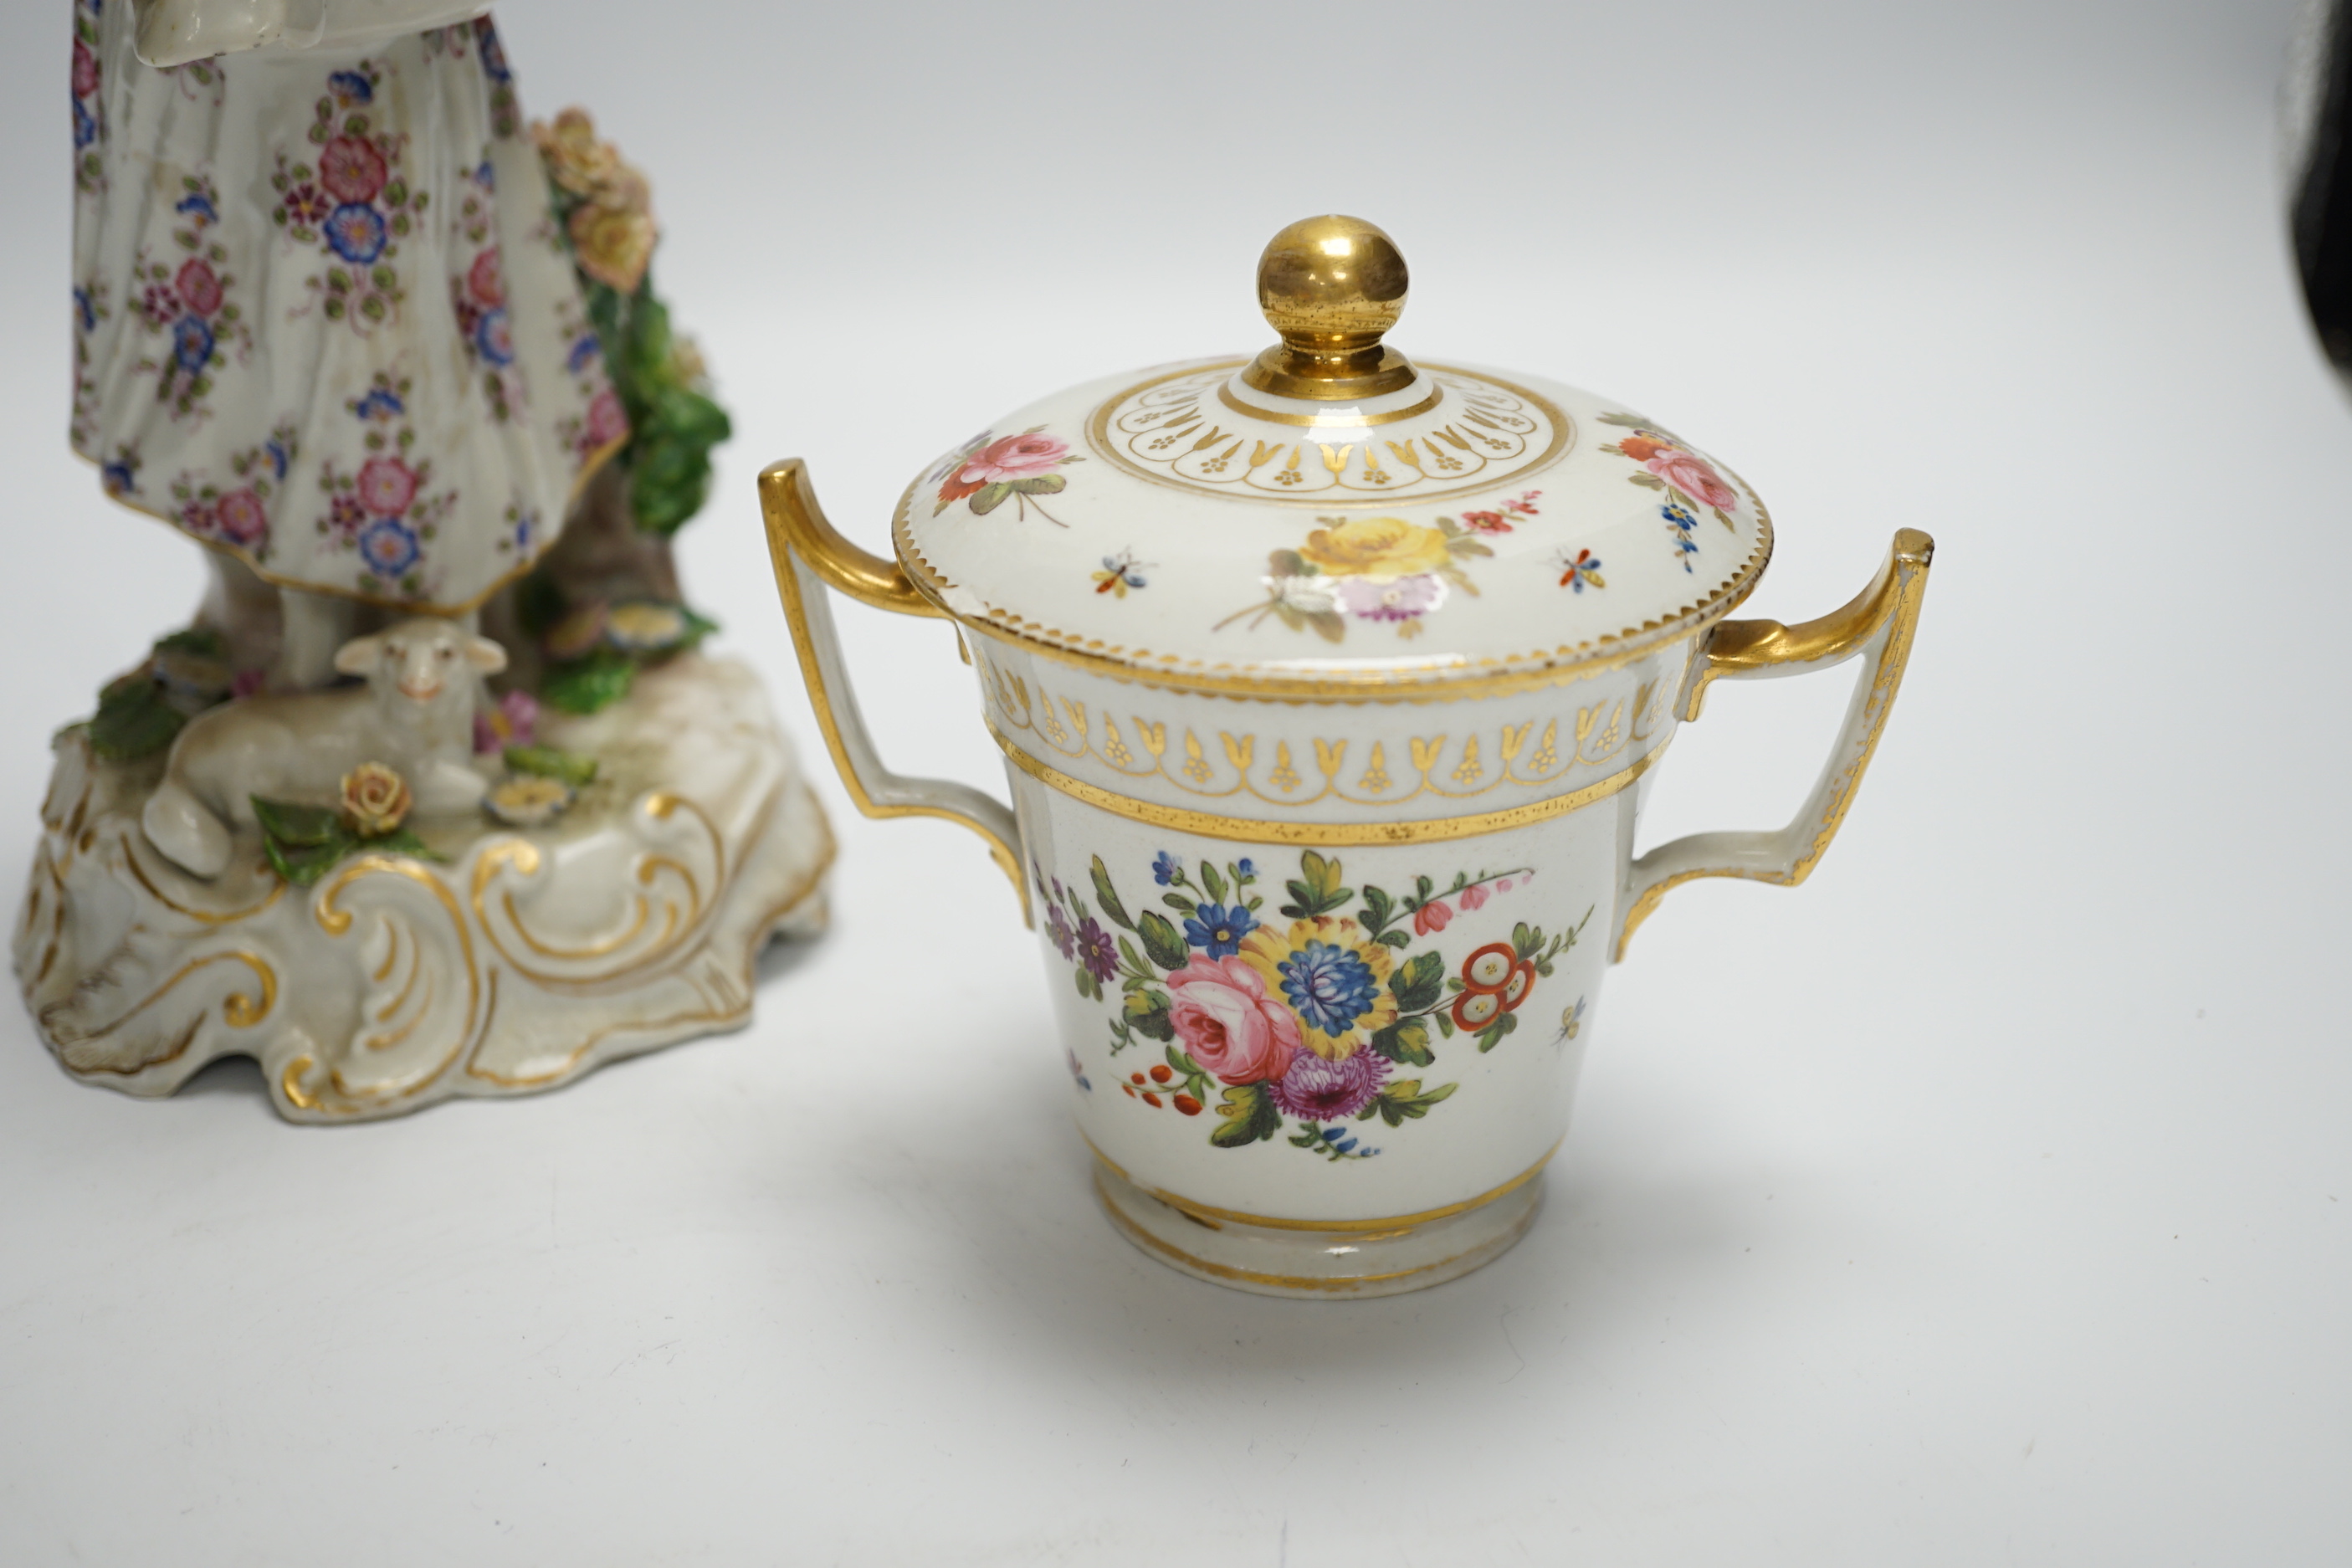 A late 19th century Continental porcelain figure of a lady, a Pinxton-type chocolate cup and cover, a Derby putti and a small Minton flower encrusted vase, figure 24.5cm (4)